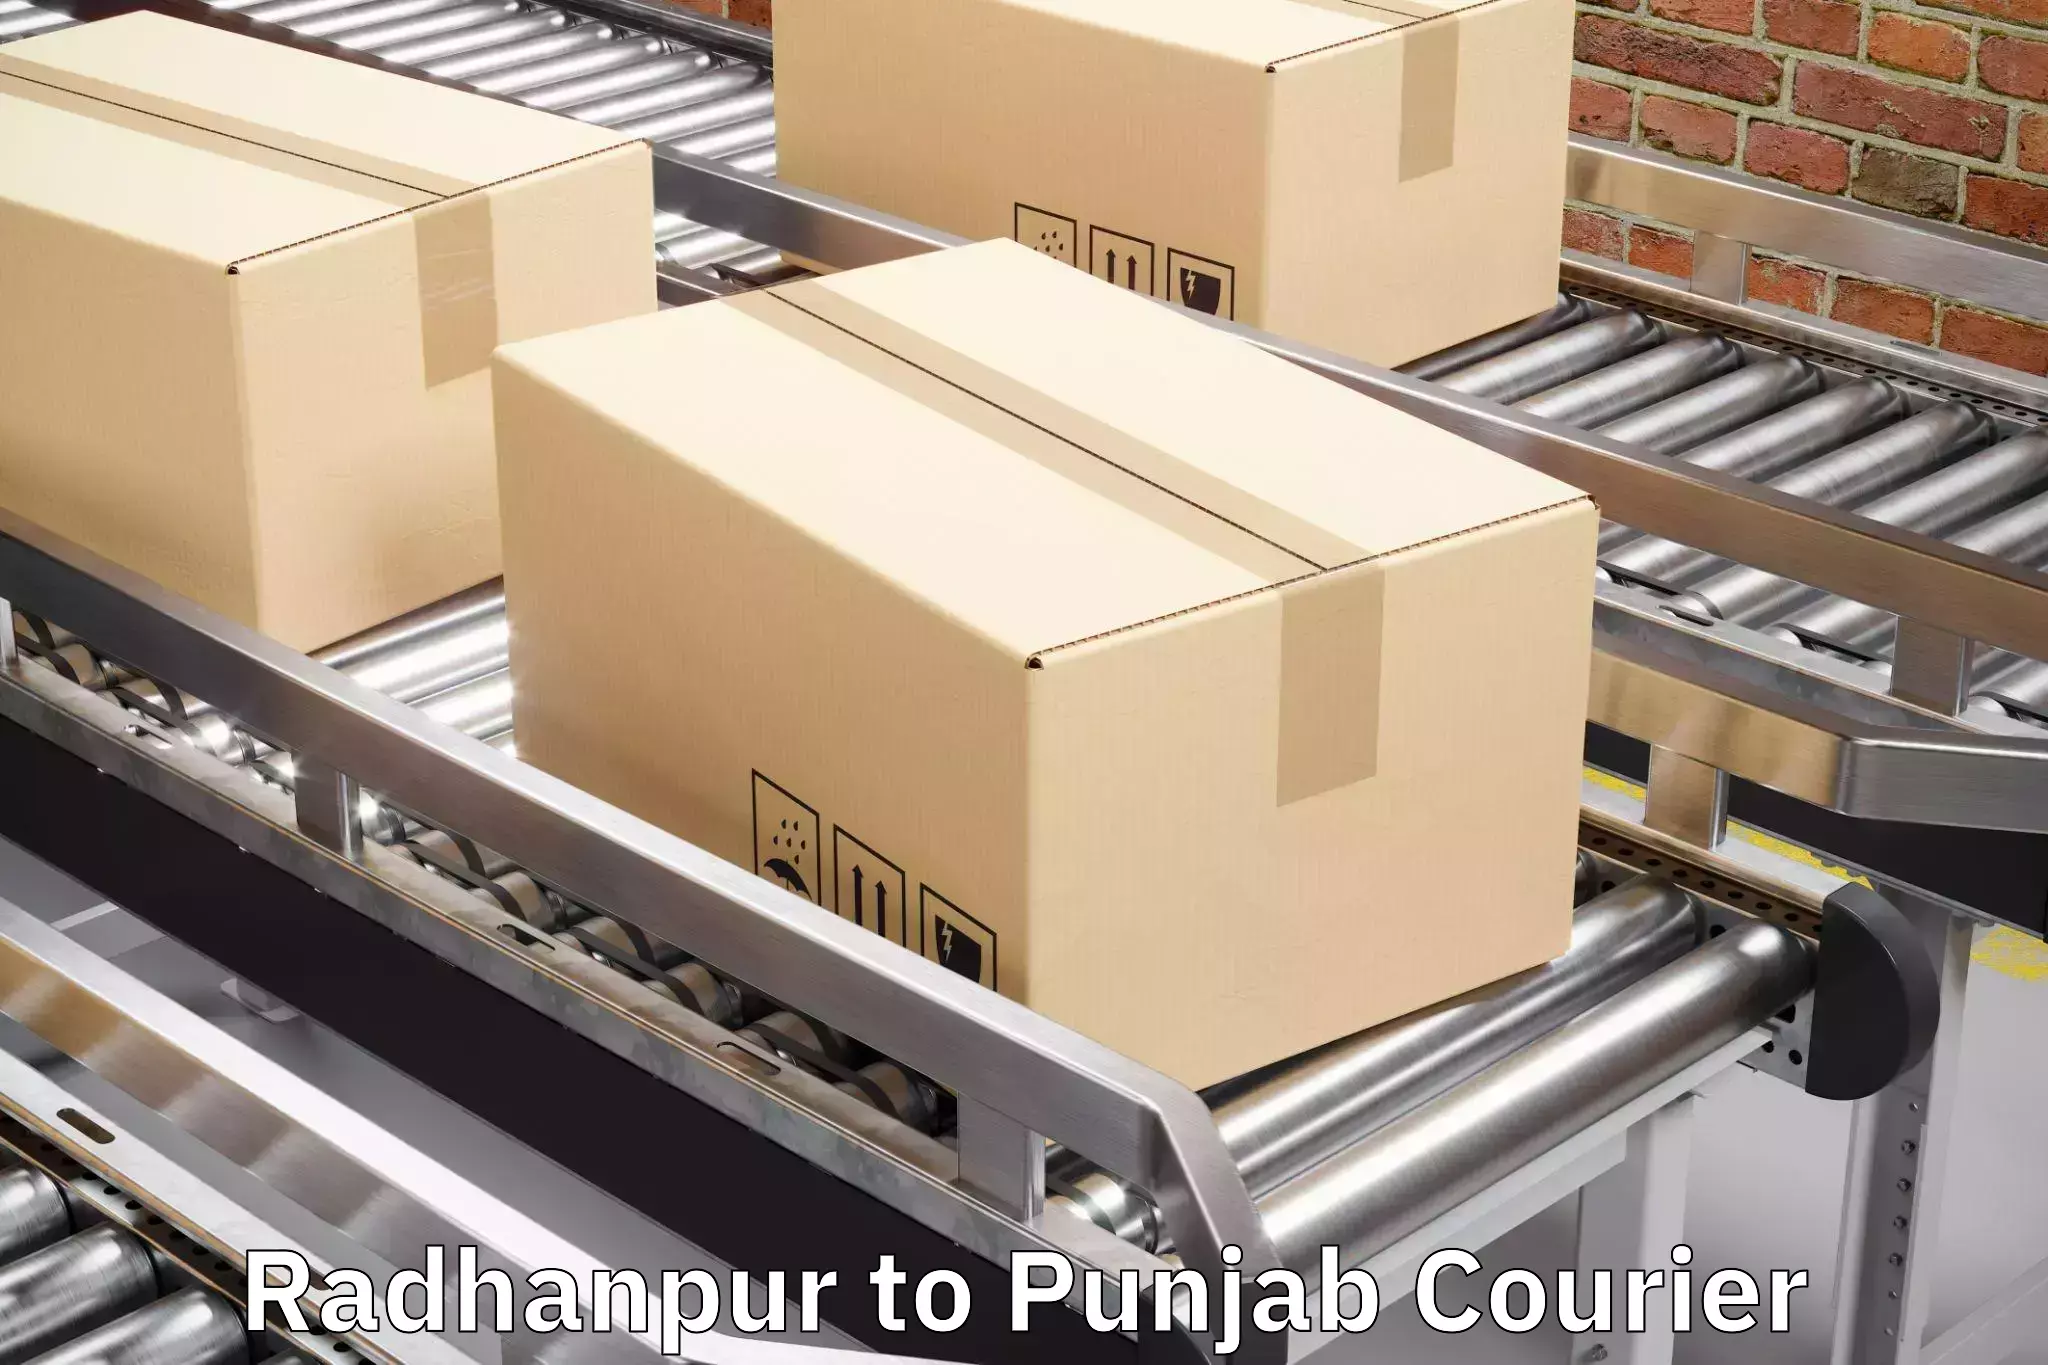 Luggage shipping specialists Radhanpur to Bathinda